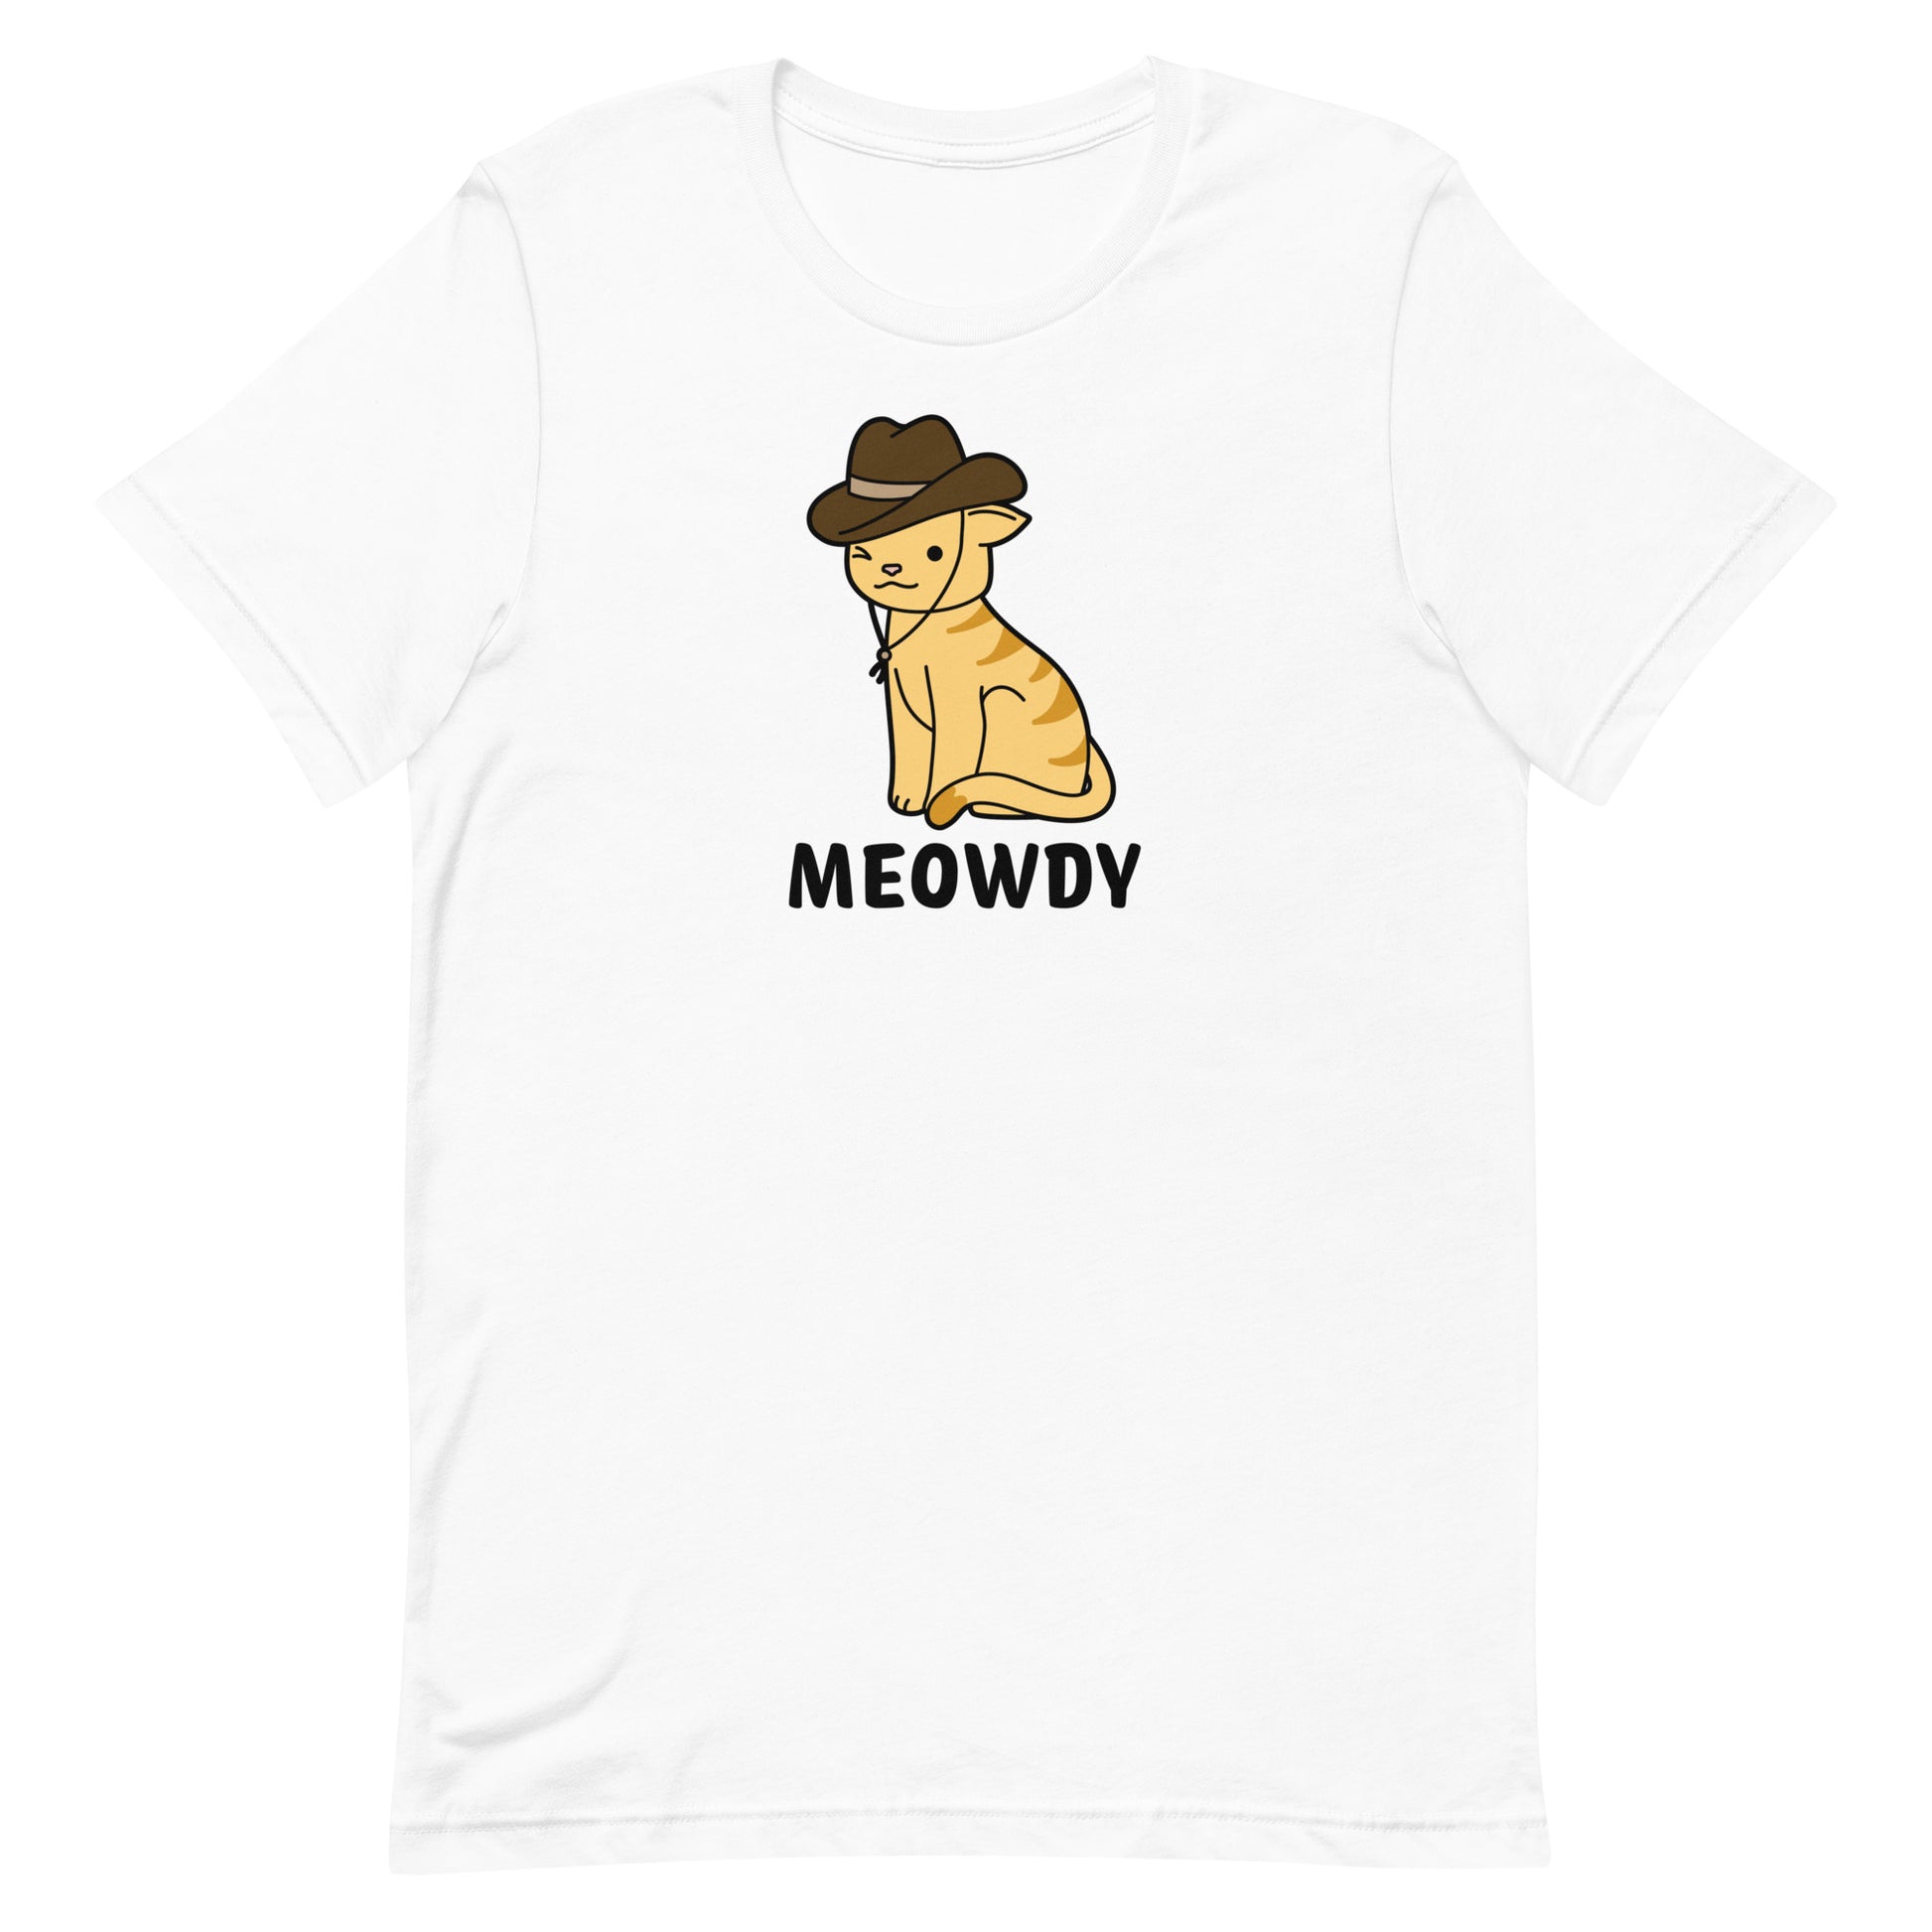 A white crewneck t-shirt featuring an illustration of an orange striped cat. The cat is winking at the viewer and wearing a cowboy hat. Text beneath him reads "Meowdy".